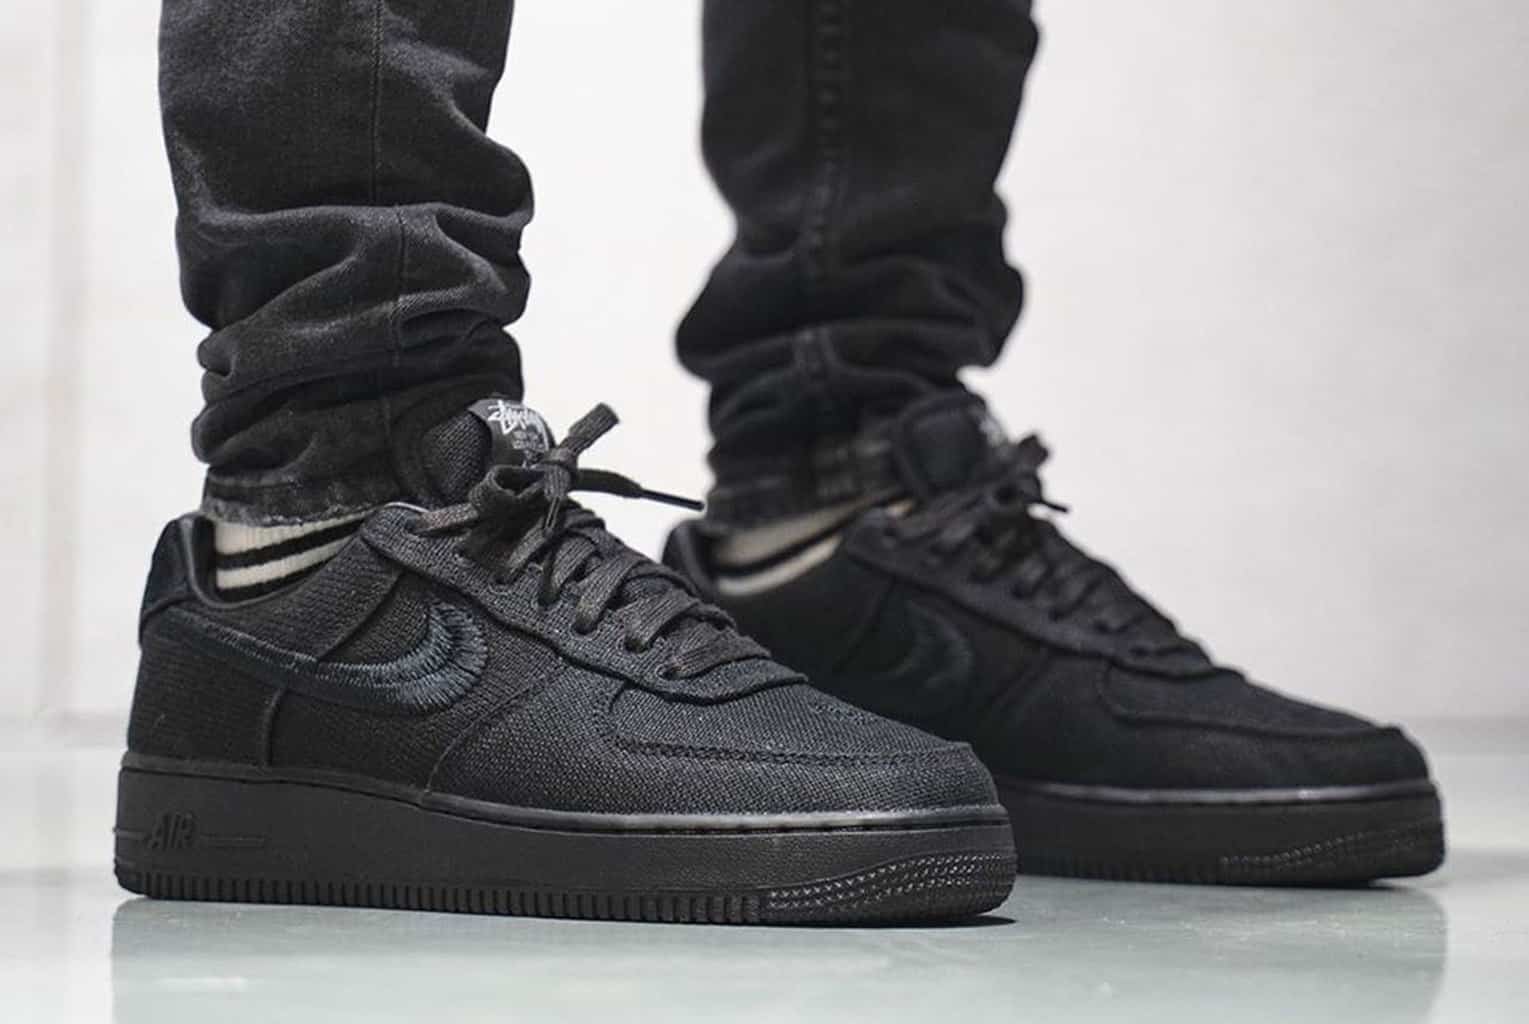 black and grey air force 1s